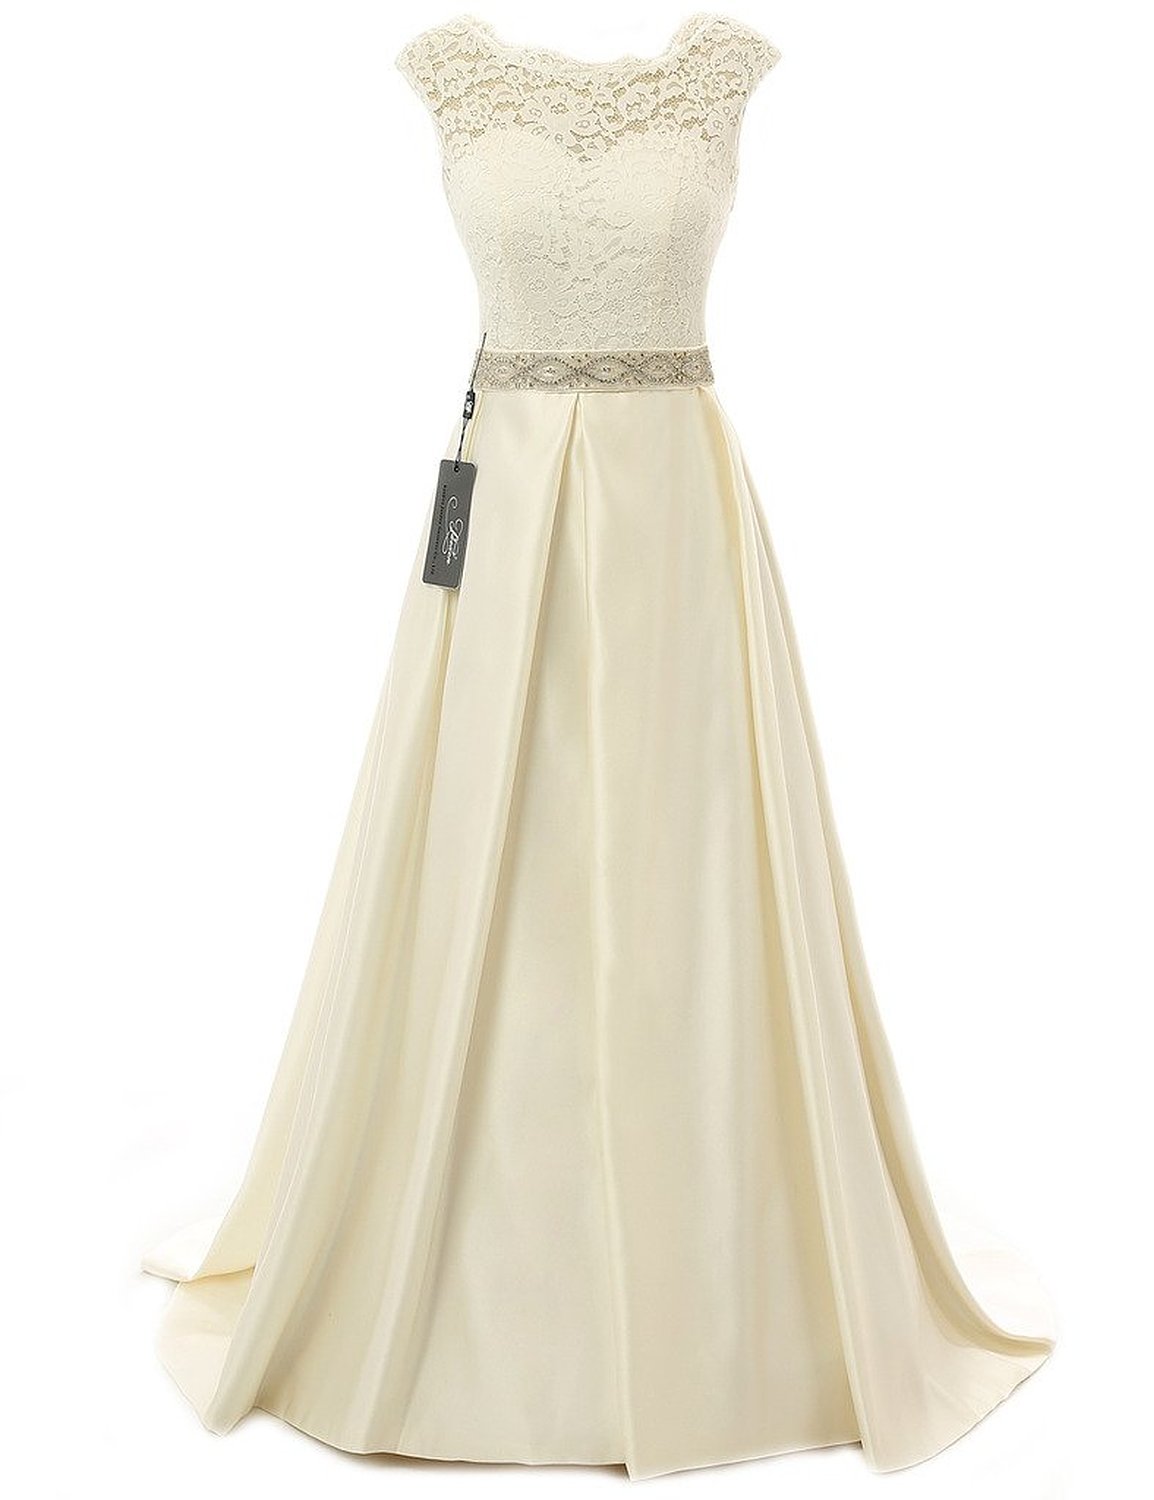 Ivory White Floor-length A-line Satin Wedding Dress With Lace Bodice And Open Back